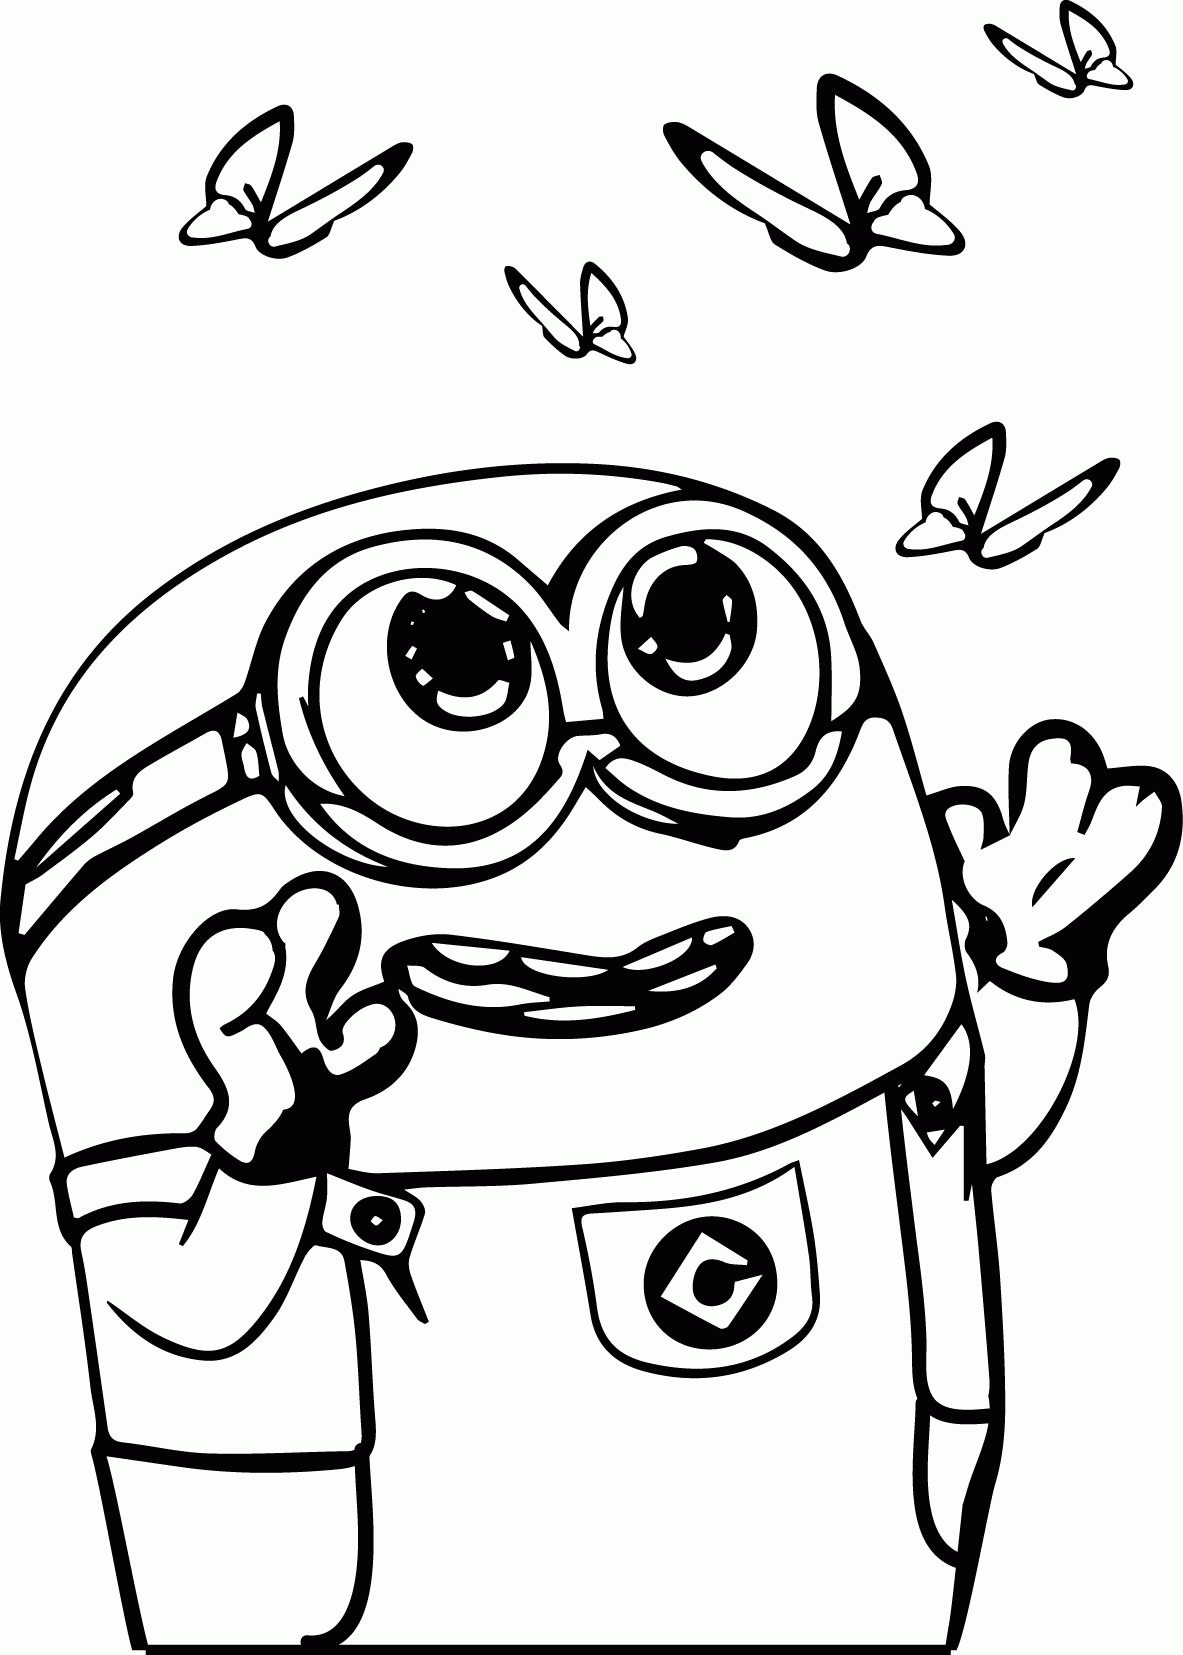 minions coloring pages minion coloring pages best coloring pages for kids pages minions coloring 